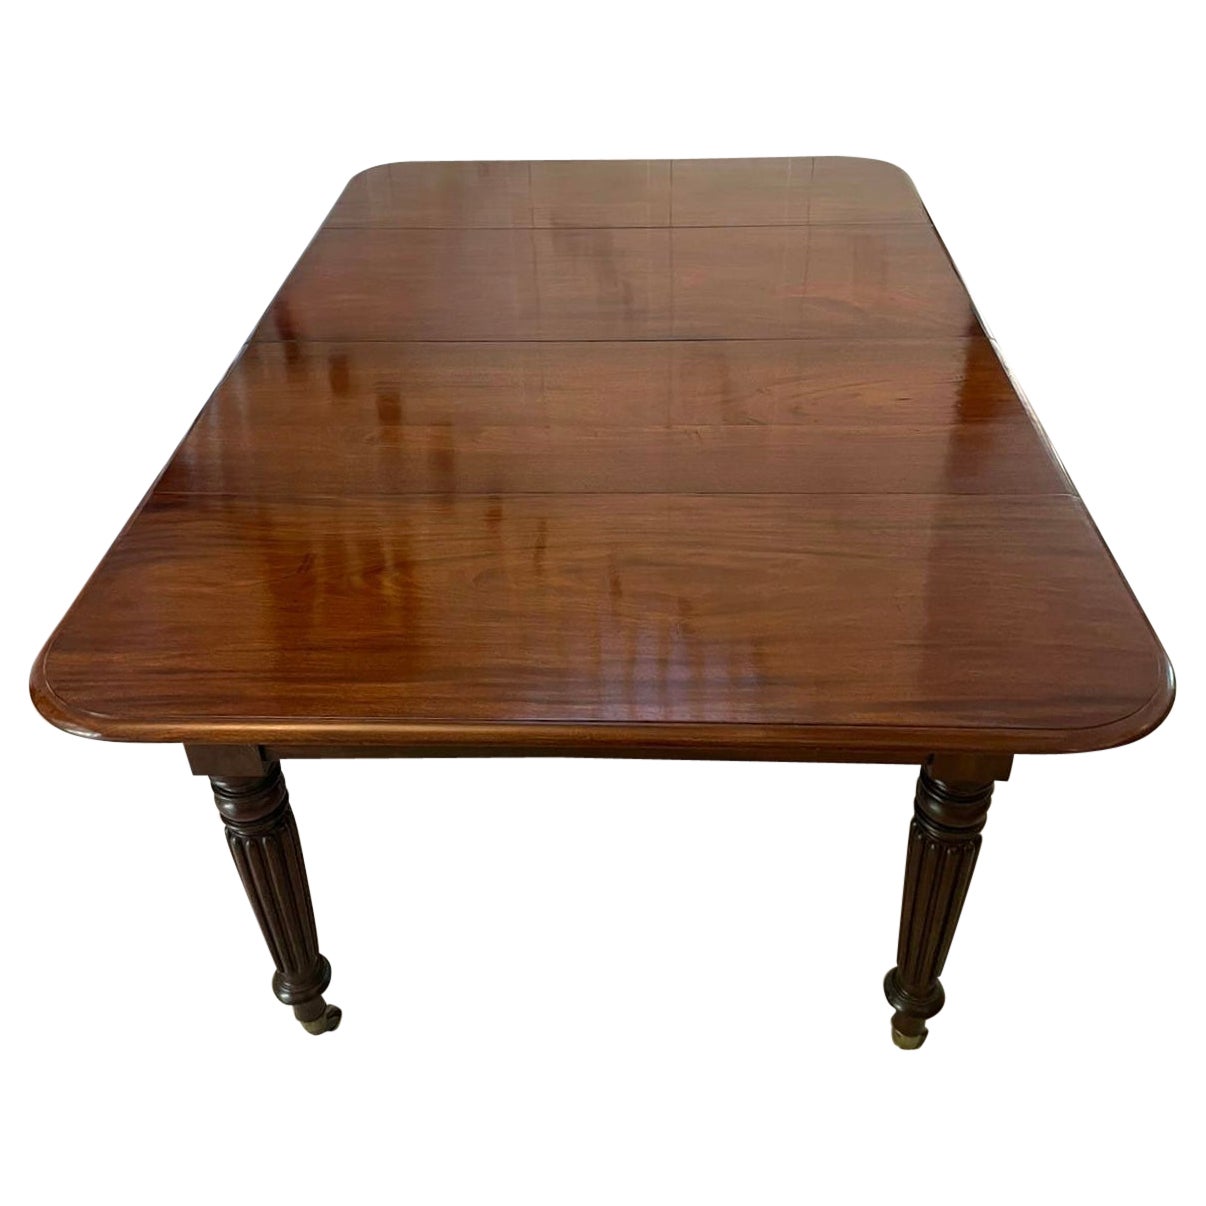 Antique Regency 8 Seater Quality Figured Mahogany Extending Dining Table 